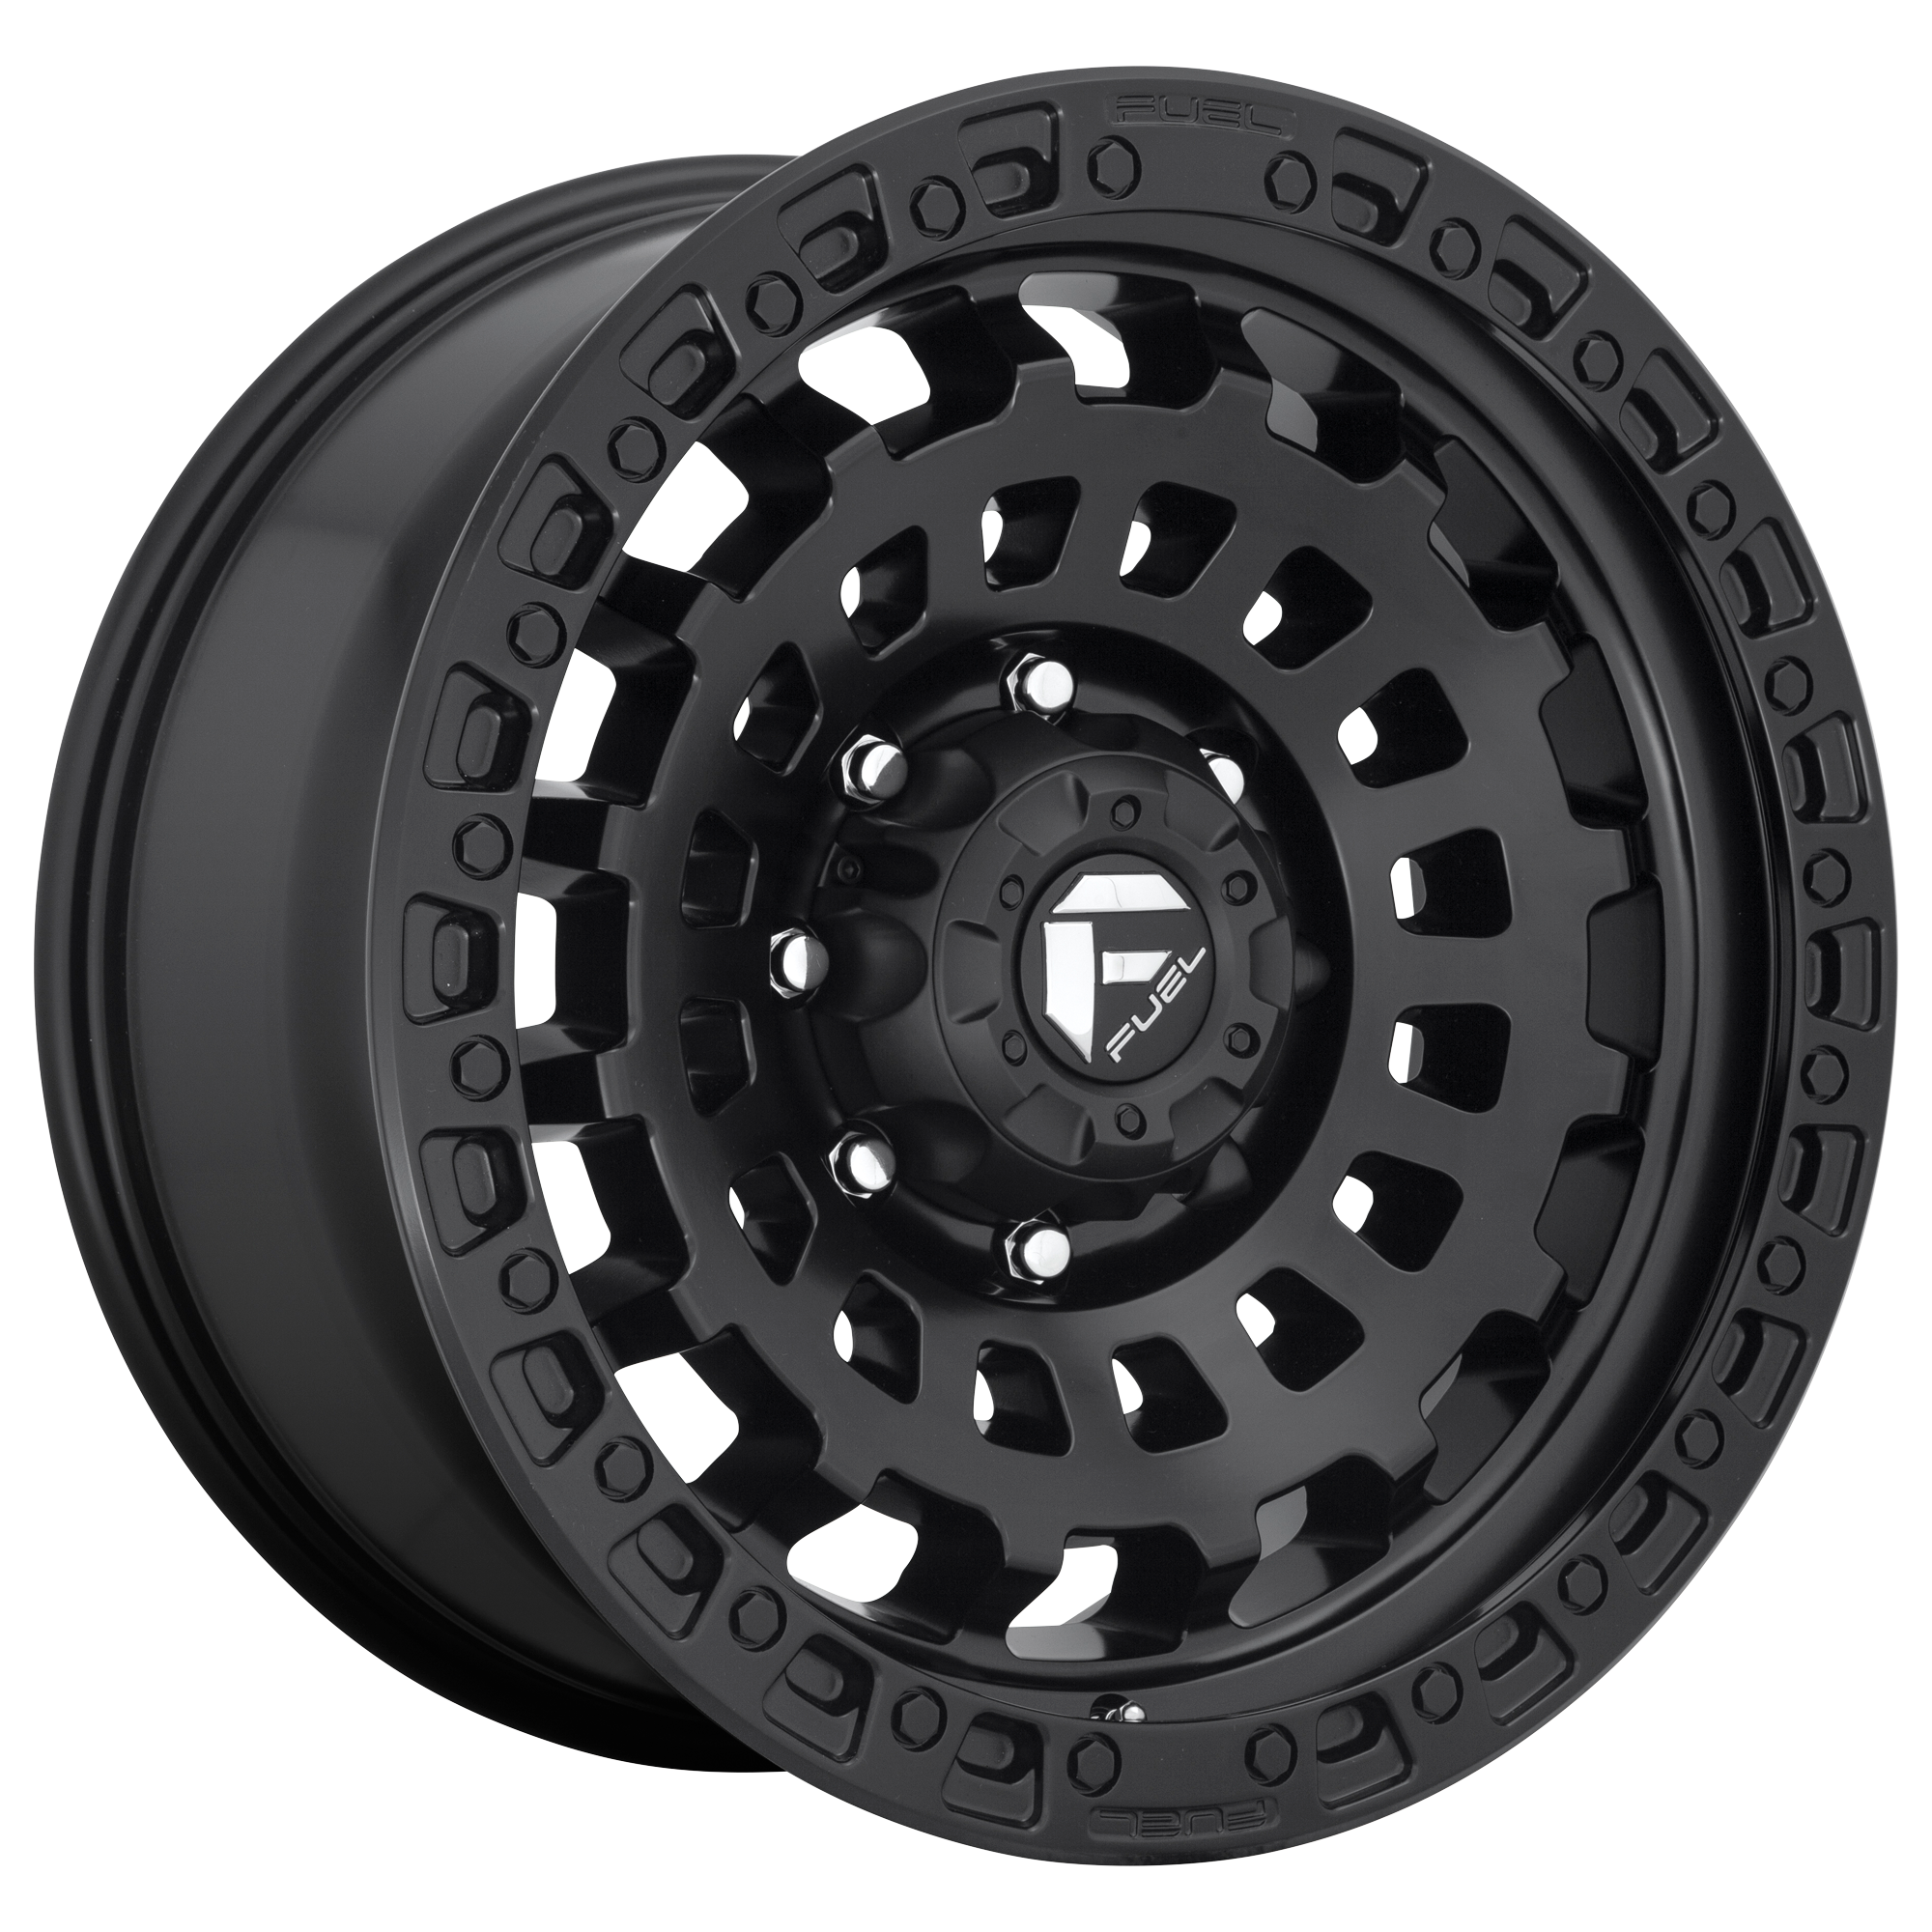 ZEPHYR 20x9 6x135.00 MATTE BLACK (20 mm) - Tires and Engine Performance